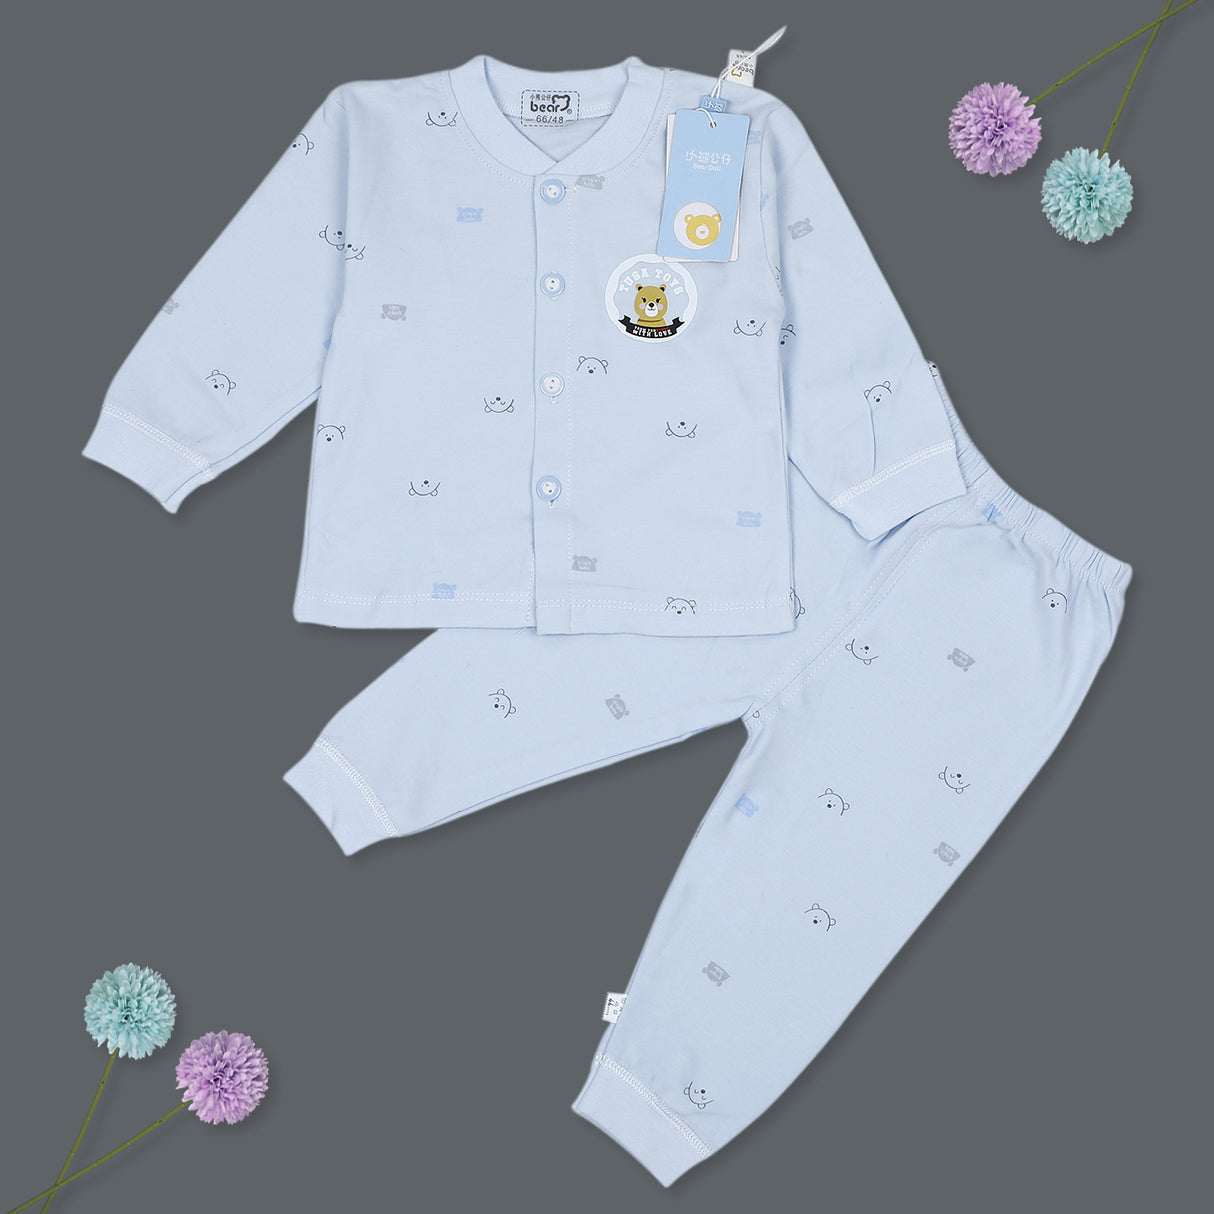 Teddy Full Sleeves Top And Pyjama Buttoned Night Suit